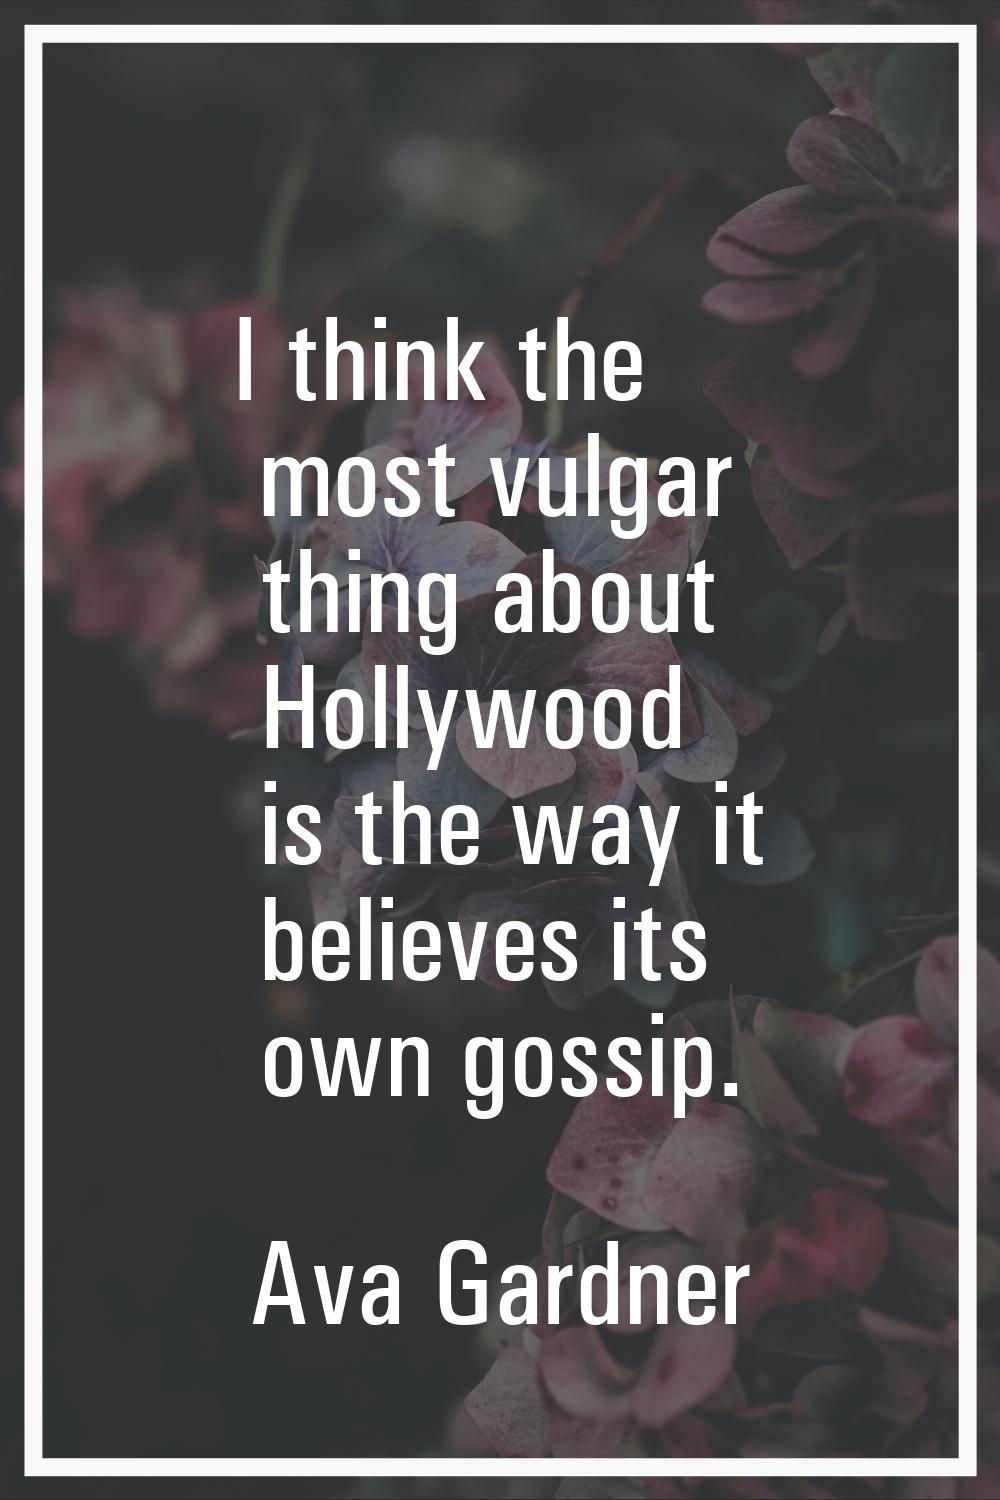 I think the most vulgar thing about Hollywood is the way it believes its own gossip.